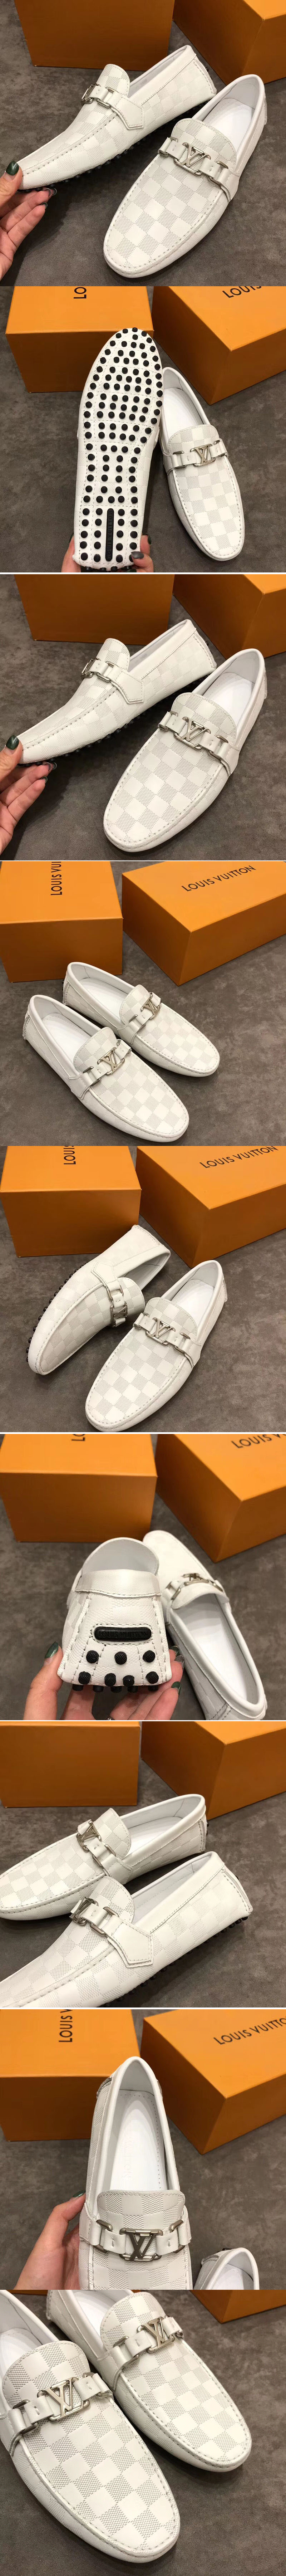 Replica Louis Vuitton LV Hockenheim Loafer And Shoes White Damier Embossed Calf leather